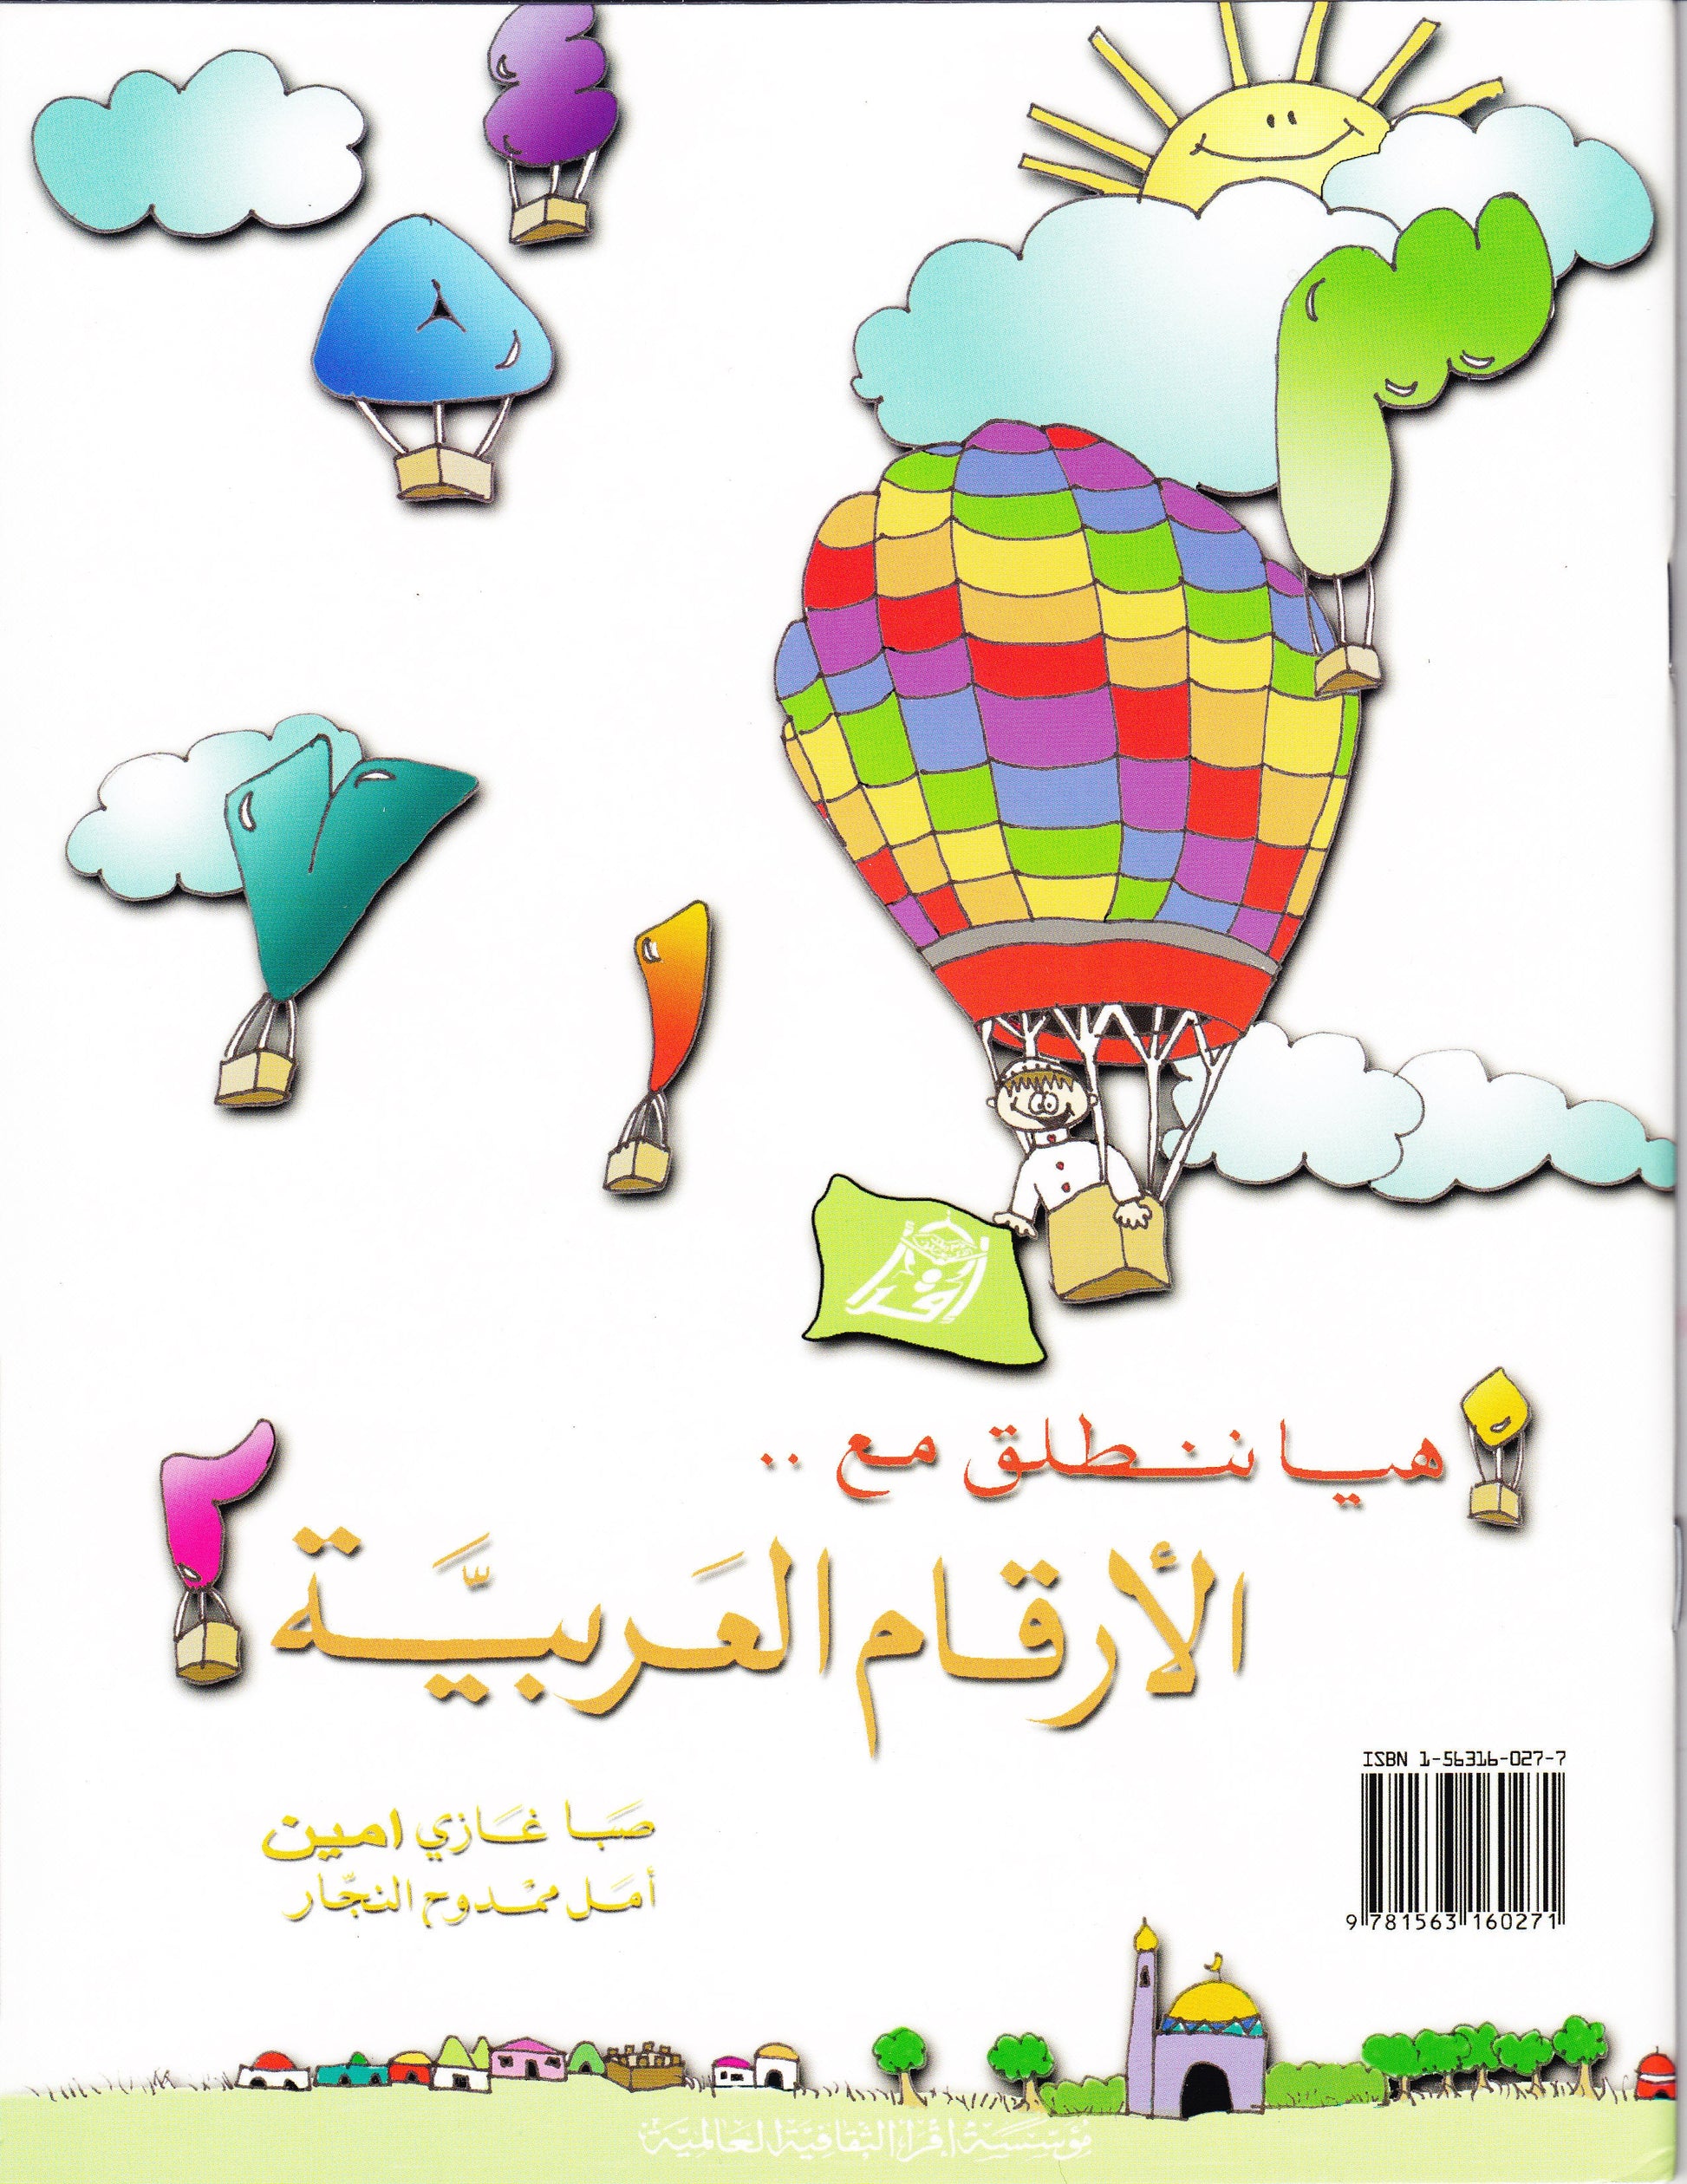 Up and Away With Arabic Numbers - Premium Textbook from IQRA' international Educational Foundation - Just $6! Shop now at IQRA' international Educational Foundation